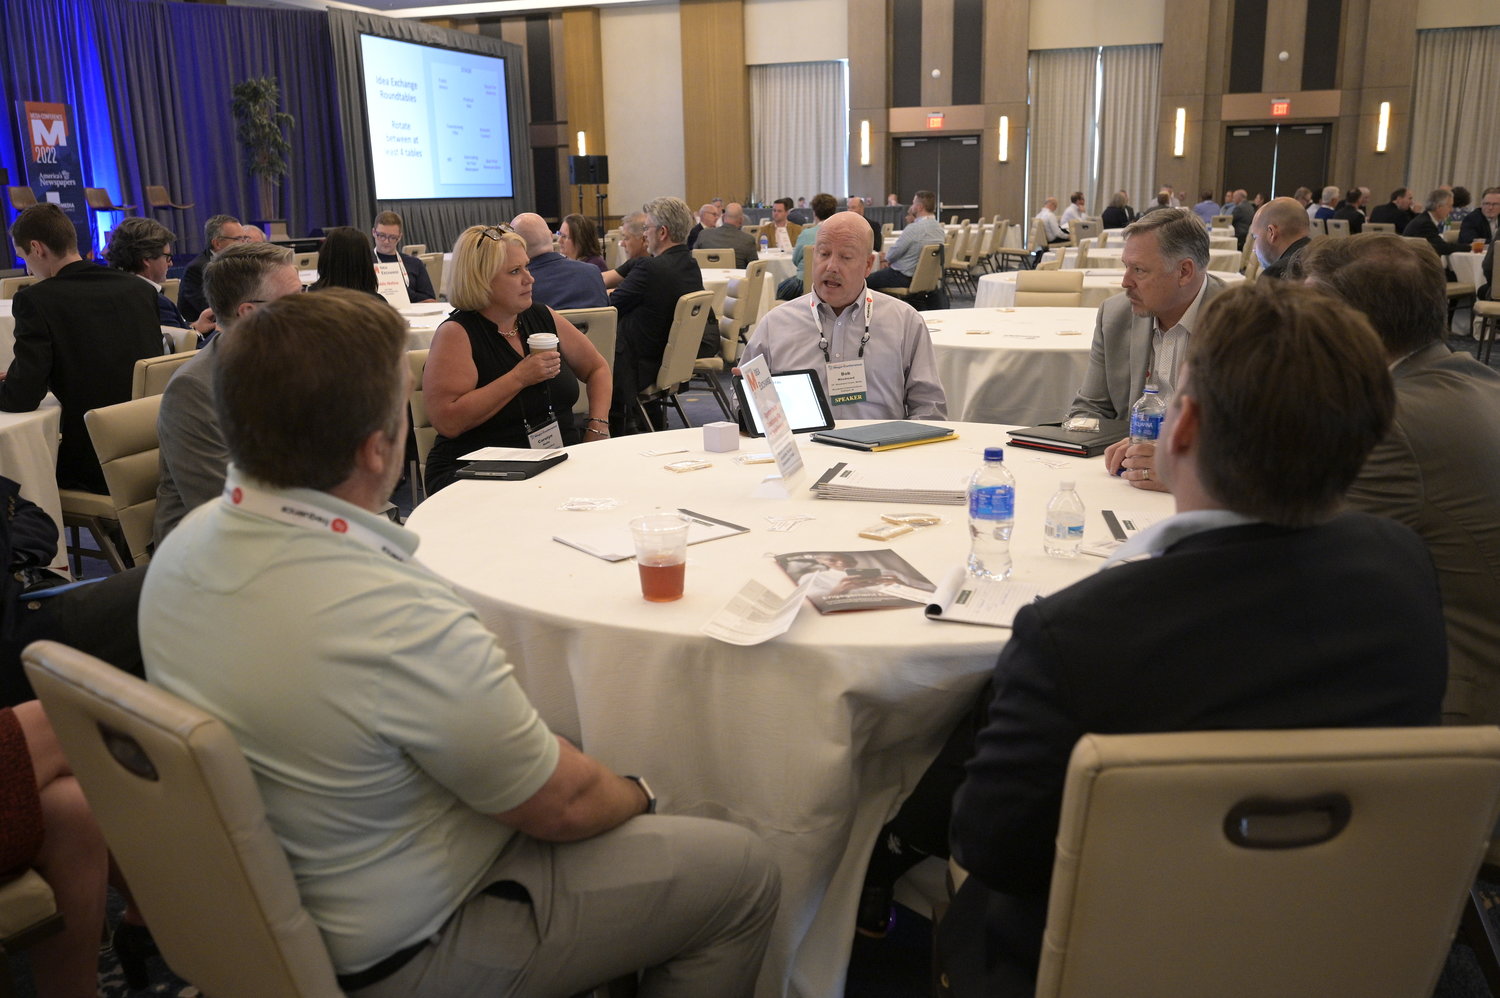 Tuesday included Idea Exchange Roundtables on key industry topics. The topic at this table was Opportunities for Transitioning FSIs to Digital Revenue, moderated by Bob Woodward, VP, Woodward Community Media, and publisher, Woodward Communications/TH Media. (Photo by Phelan M. Ebenhack)